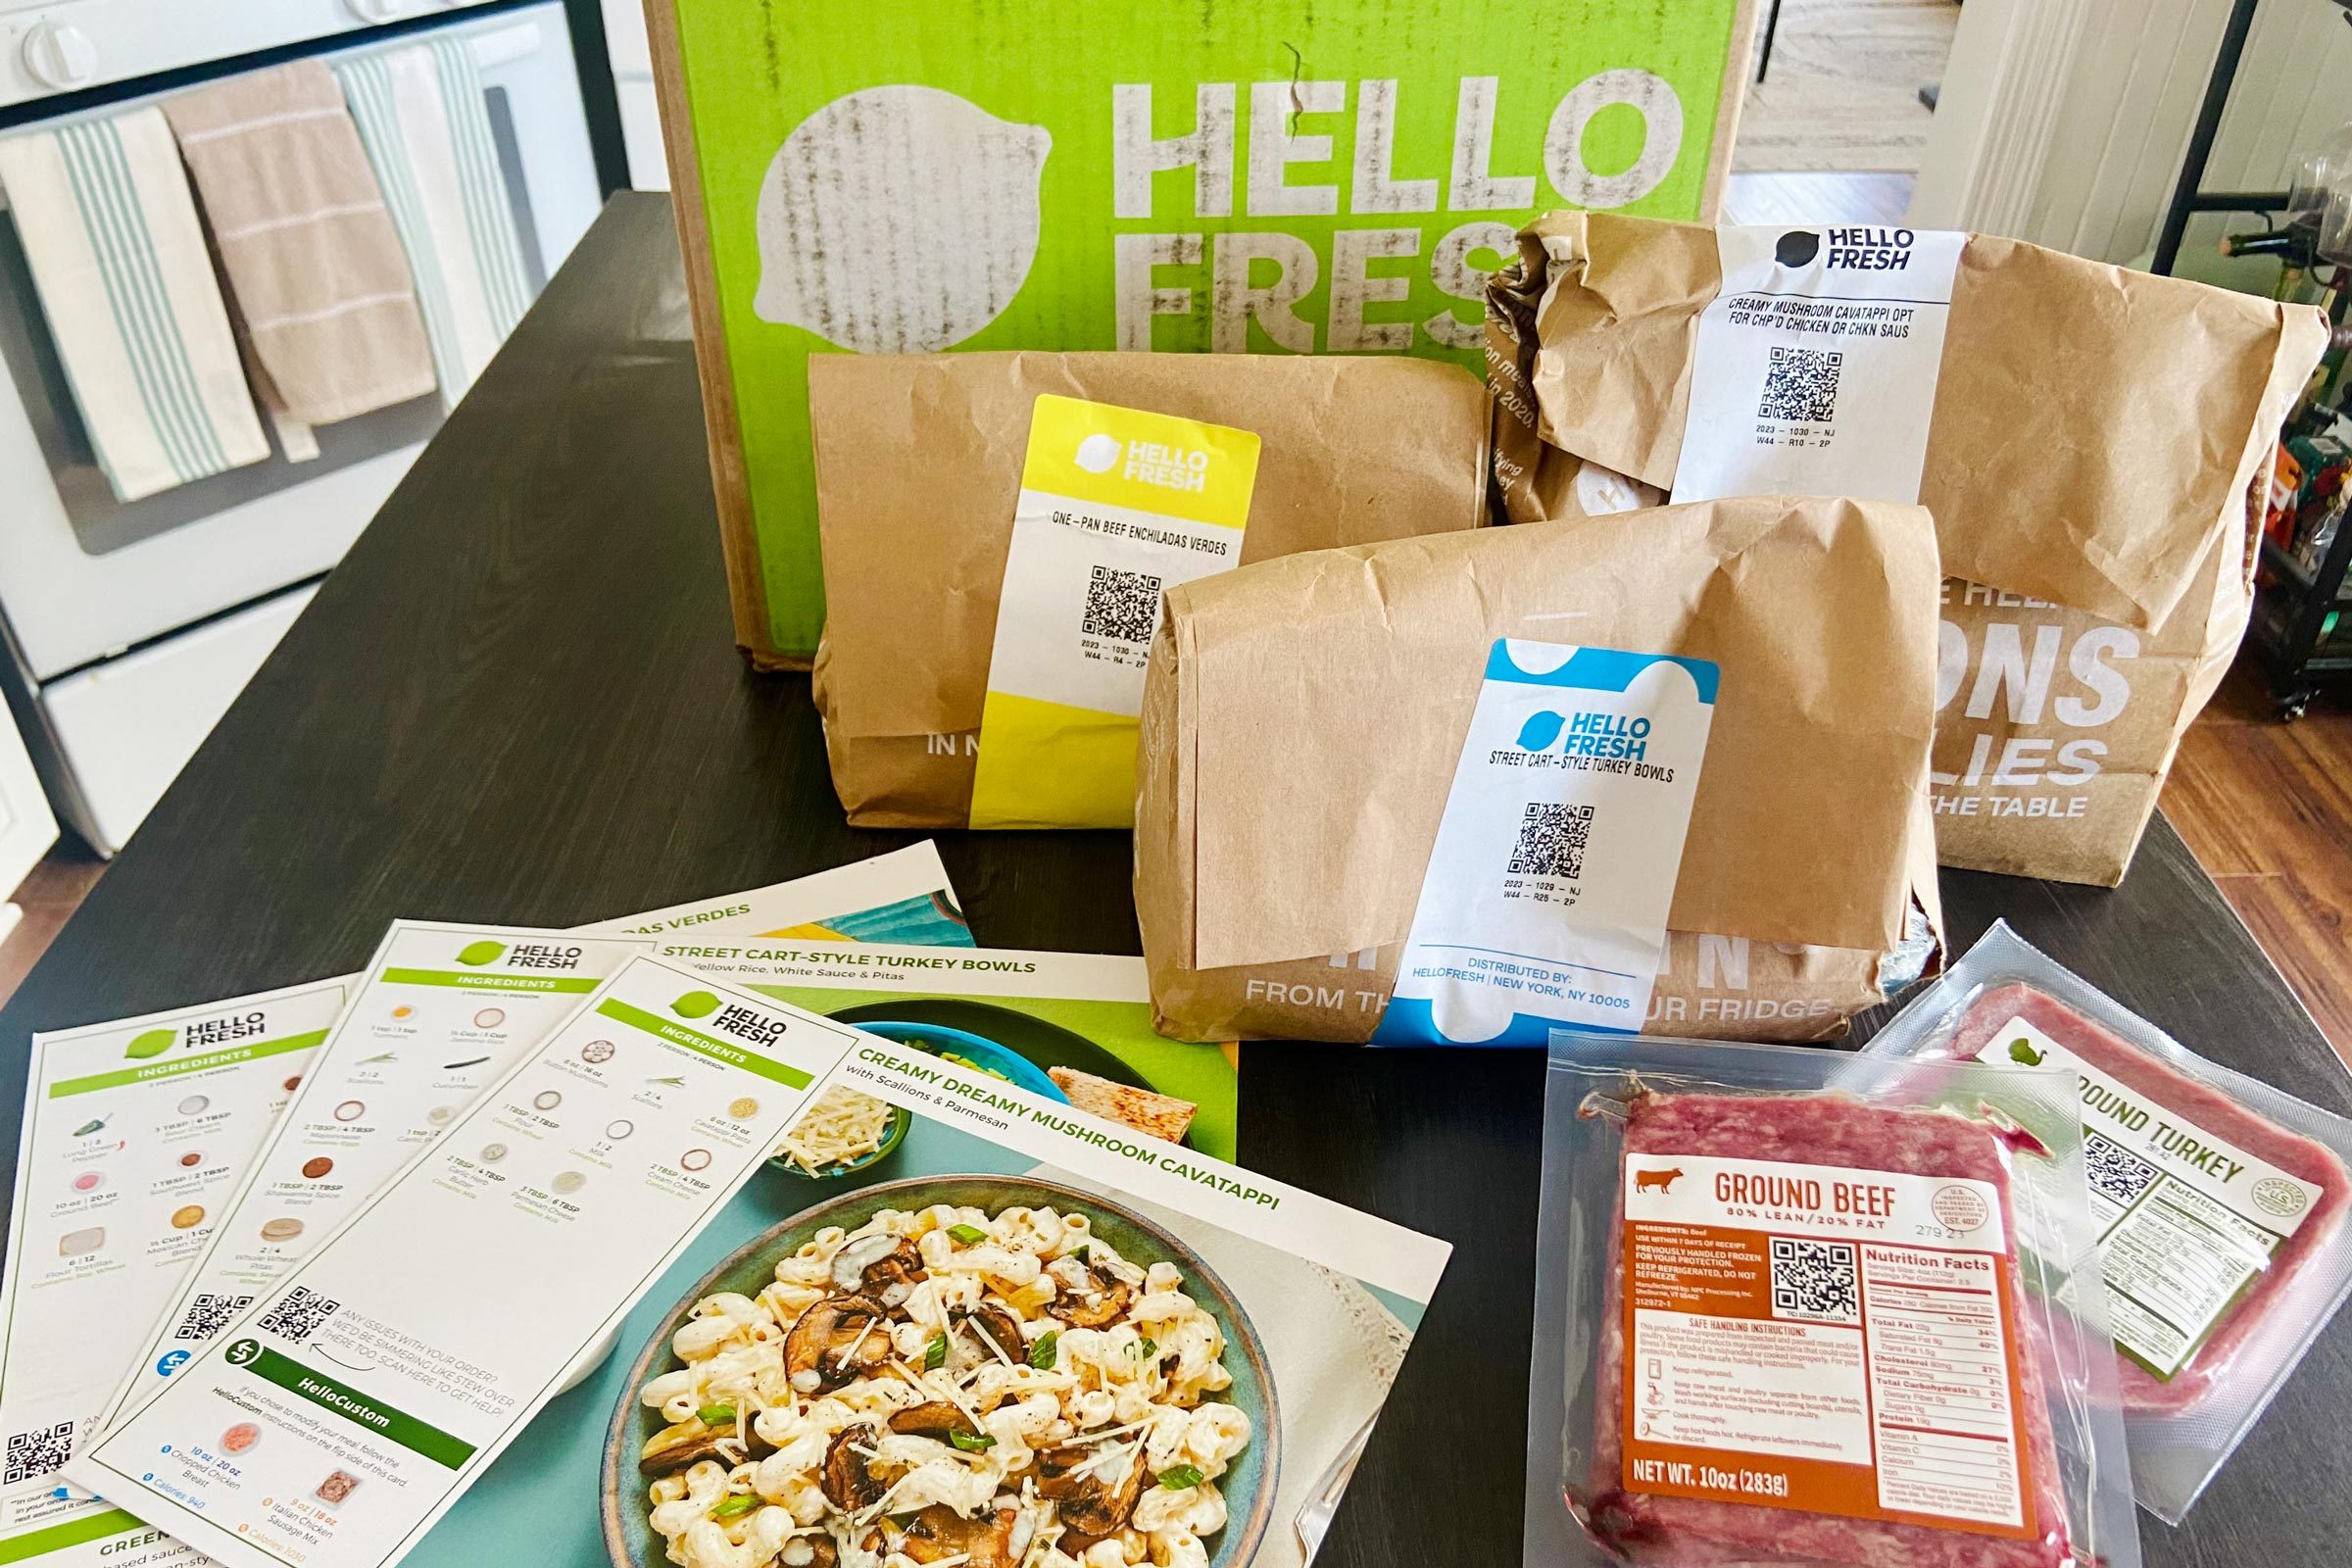 <h3>HelloFresh</h3> <p><a href="https://www.hellofresh.com/" rel="noopener noreferrer">HelloFresh</a> is one of the most trusted meal kits, and it's been around for years. It offers a variety of meals for both novices and kitchen veterans. Plus, the servings are on the more affordable side. What's newer, though, is the HelloFresh market, which elevates a HelloFresh subscription to a truly custom experience. The market sells breakfast items, side dishes, snacks, beverages and even fresh produce. These add-ons then arrive in the same box as the other recipes and come from an array of popular brands and vendors.</p> <p>Our tester, <a href="https://www.tasteofhome.com/author/ahigley/">Annamarie Higley</a>, was really impressed with the Street Cart-Style Turkey Bowls: "All the components came together for an interesting, unexpected and texturally exciting dish," she says. "Maybe it’s because I’m partial to Middle Eastern food, but this meal was easily my favorite of the bunch." Same goes for the Creamy Dreamy Mushroom Cavatappi she sampled.</p> <p>In all, Annamarie was blown away by the service's flavorful meals, according to her full <a href="https://www.tasteofhome.com/article/hellofresh-meal-prep-service-review/">Hello Fresh review</a>. It's ideal for busy weeks when you want the convenience of takeout but the nutrition of a home-cooked meal. File it under <a href="https://www.tasteofhome.com/collection/food-delivery-service/">food delivery services</a> to gift a busy loved one.</p> <h3><strong>Pros</strong></h3> <ul> <li class="">Affordable price point</li> <li>HelloFresh market</li> <li>Strong recipe variety</li> <li class="">Easy-to-follow recipes with accurate cook/prep times</li> <li class="">Appropriate portion sizes</li> </ul> <h3><strong>Cons</strong></h3> <ul> <li class="">Not always the freshest ingredients</li> <li class="">Considerable cleanup</li> </ul> <p class="listicle-page__cta-button-shop"><a class="shop-btn" href="https://www.hellofresh.com/">Shop Now</a></p>